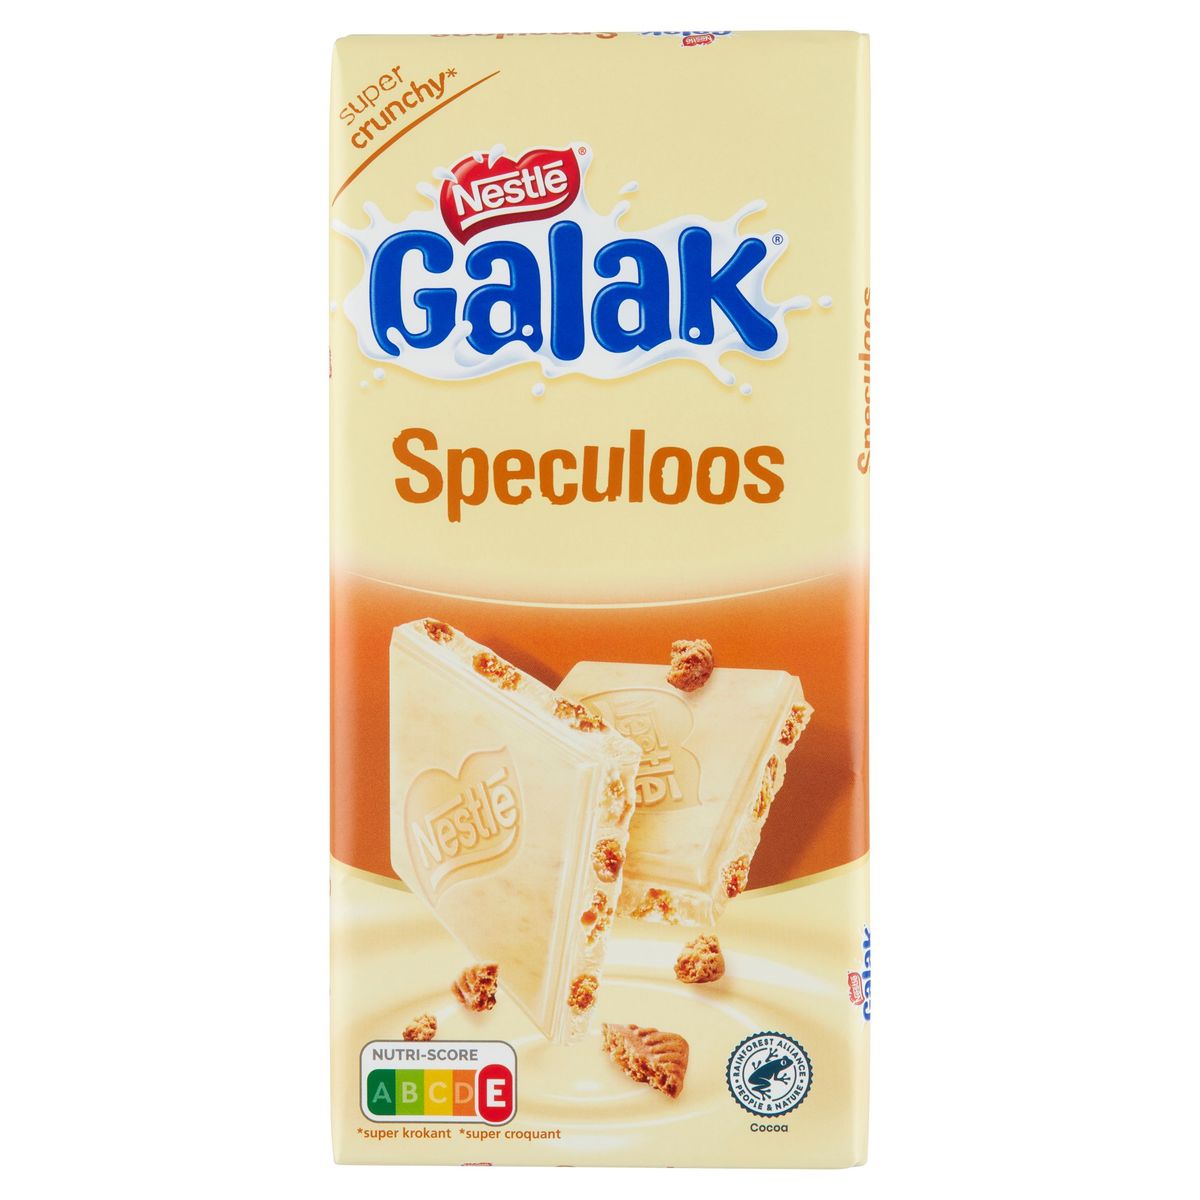 GALAK Speculoos Tablette 125g